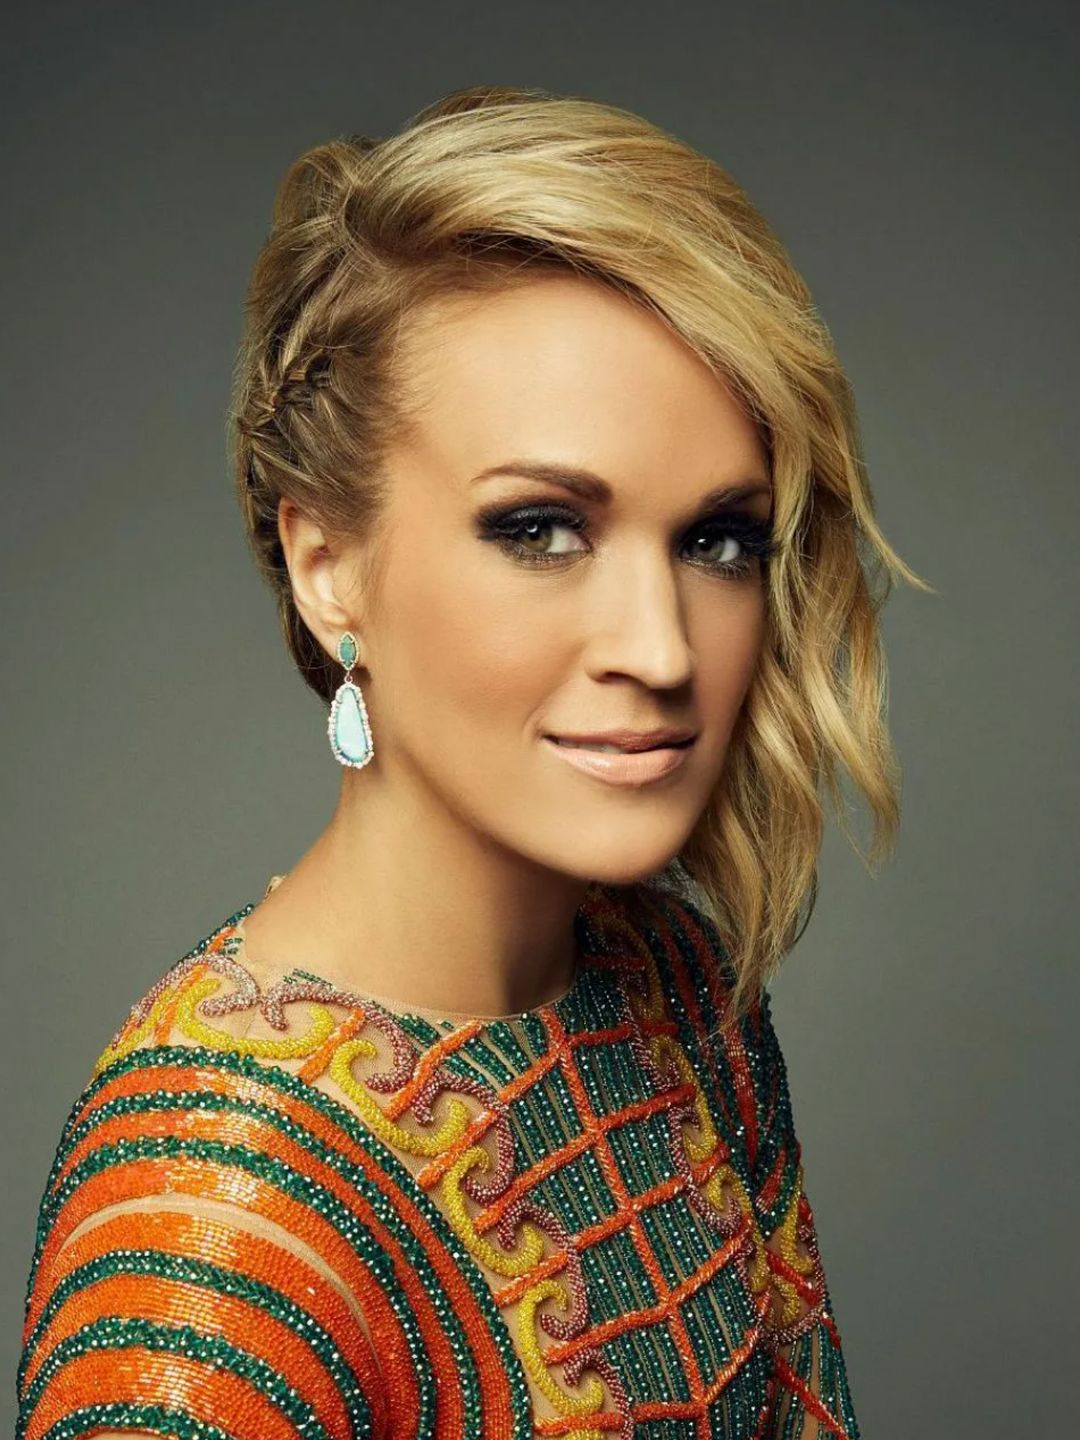 Carrie Underwood place of birth